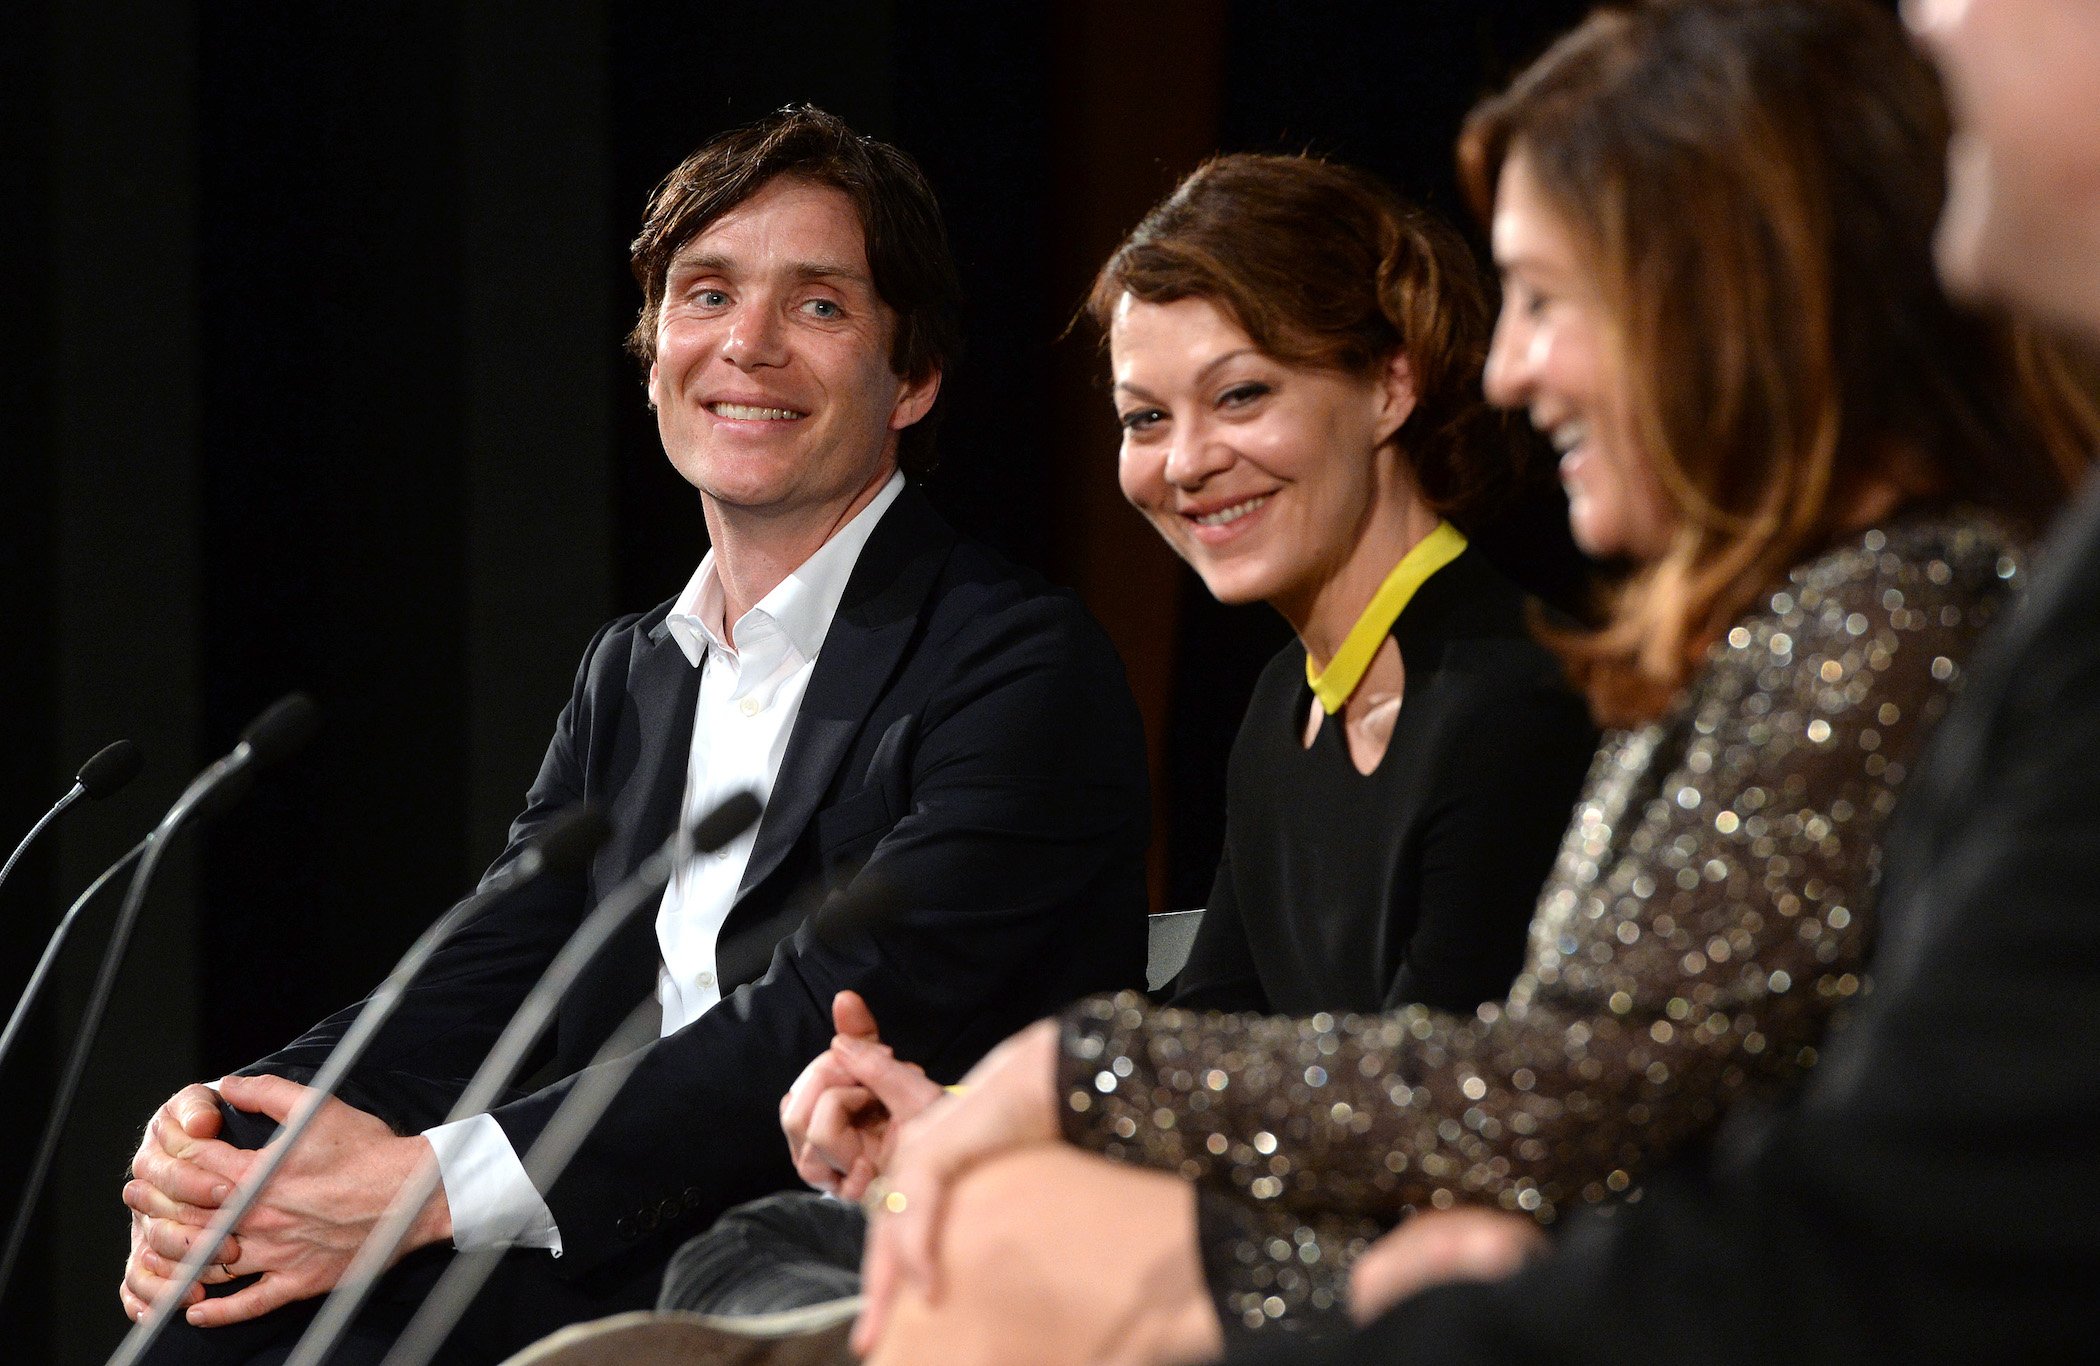 Cillian Murphy, the star of 'Peaky Blinders' Season 6, with Helen McCrory during a Q&A at the premiere of 'Peaky Blinders' Season 3